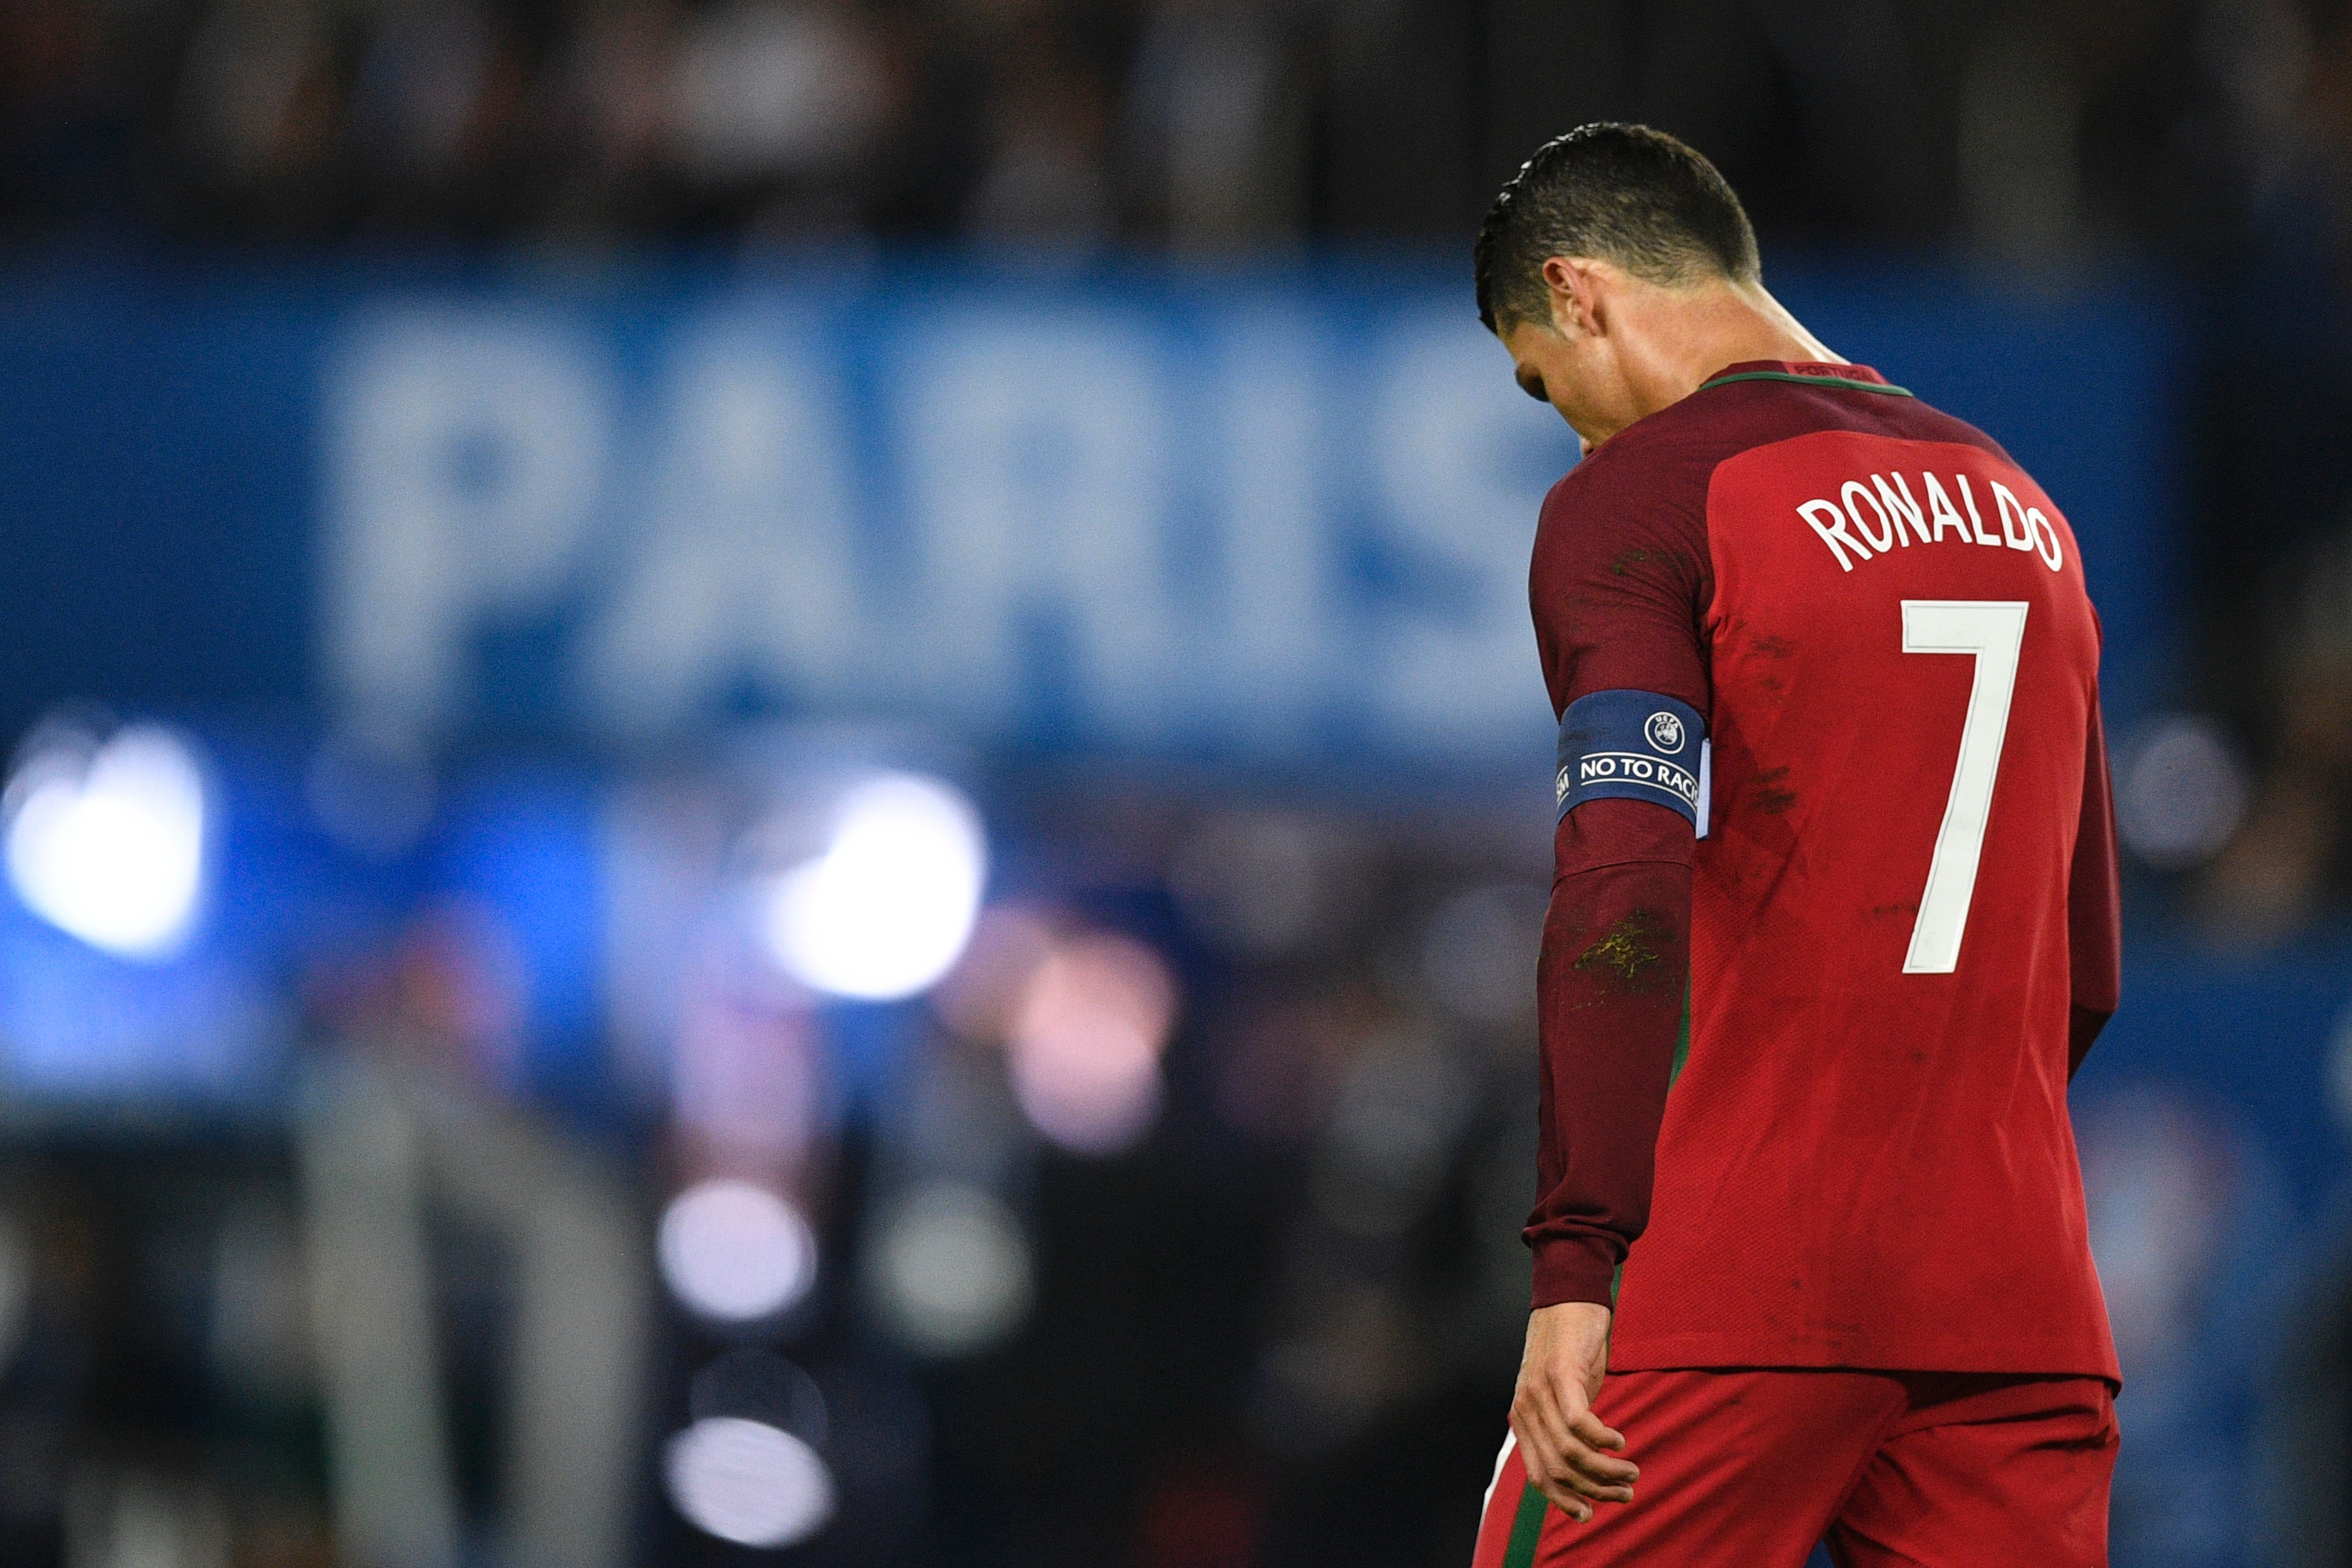 TOPSHOT - Portugal's forward Cristiano Ronaldo reacts after he missed to score a penalty during the Euro 2016 group F football match between Portugal and Austria at the Parc des Princes in Paris on June 18, 2016. / AFP / MARTIN BUREAU        (Photo credit should read MARTIN BUREAU/AFP/Getty Images)